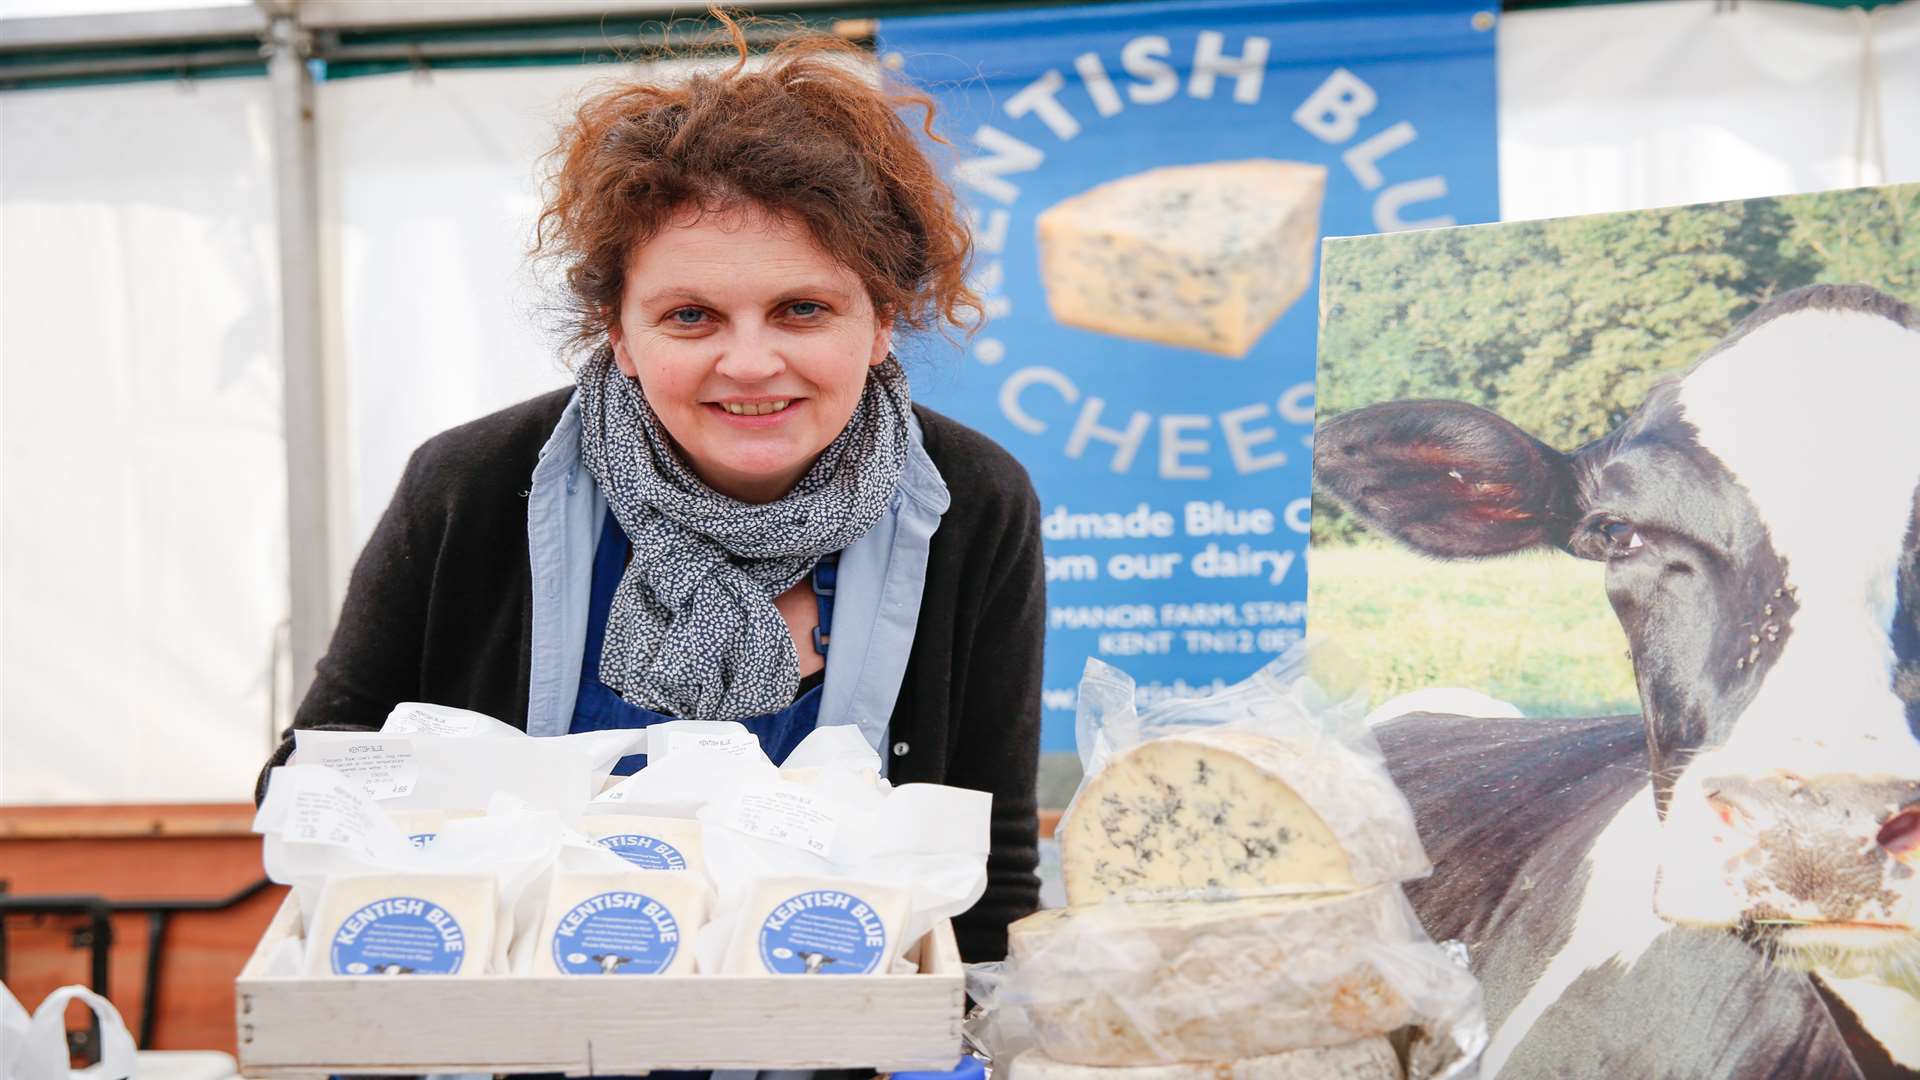 Karen Reynolds from Kingcott Dairy tempting visitors with some Kentish blue cheese